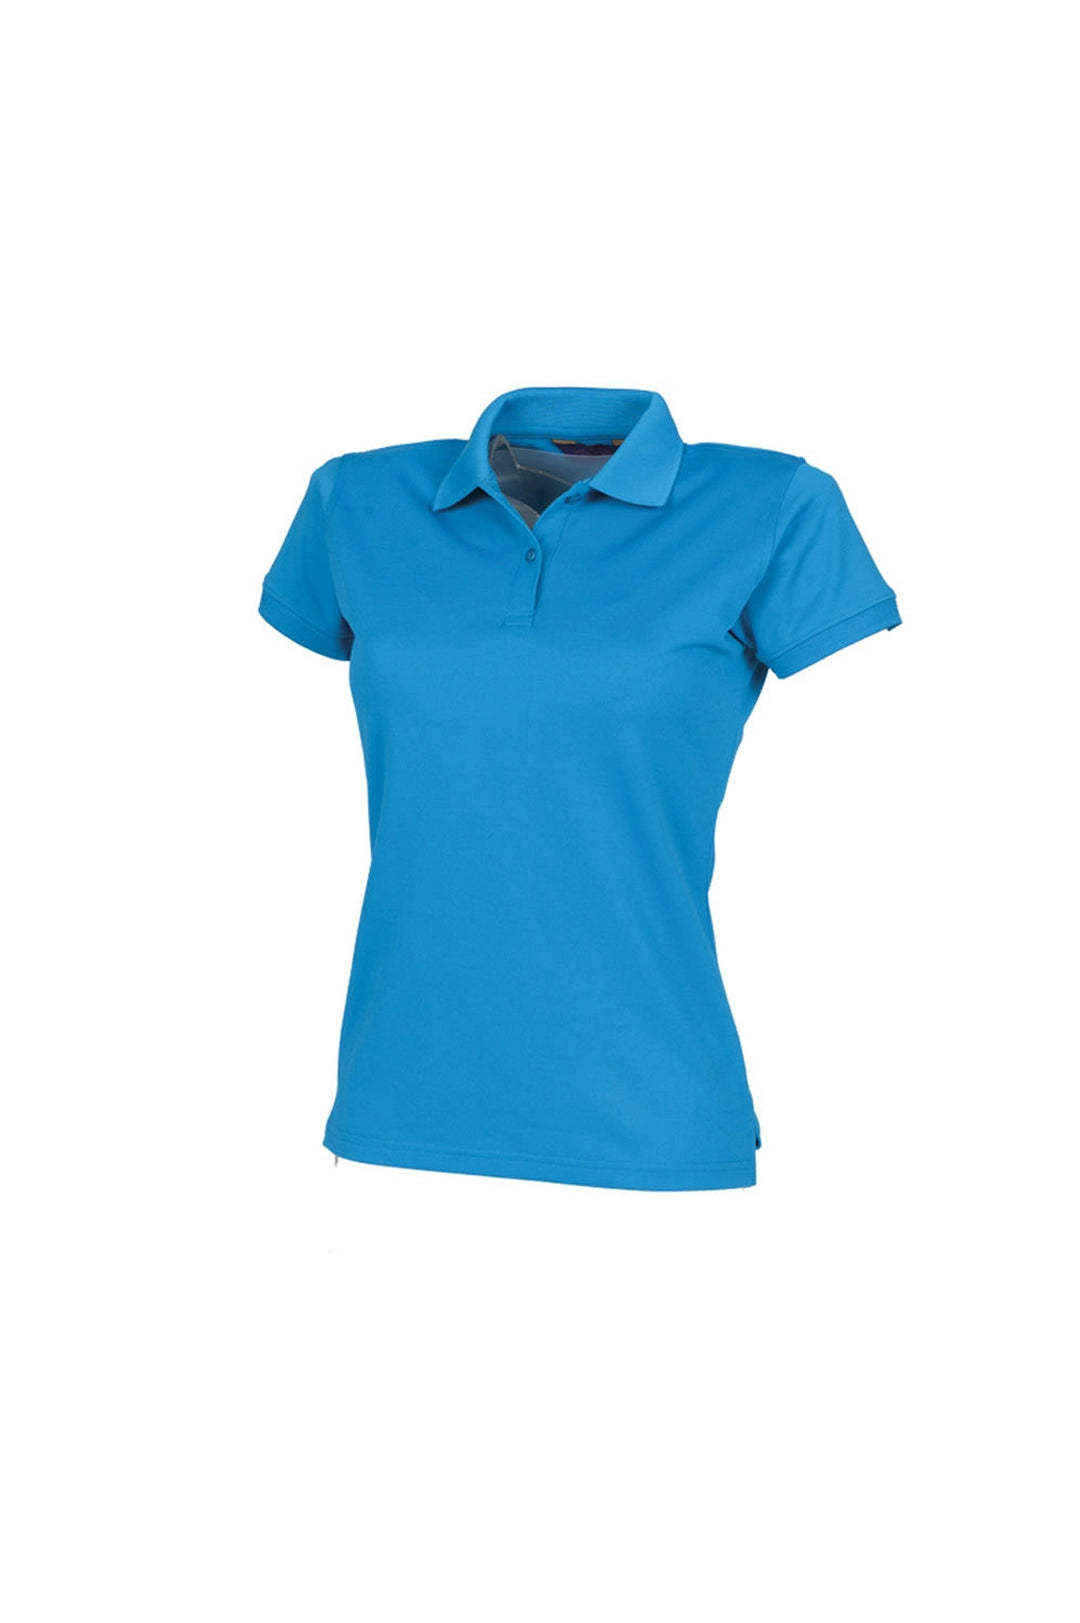 Henbury Ladies Coolplus Wicking Piqu’ Polo Shirt Other color - COOZO